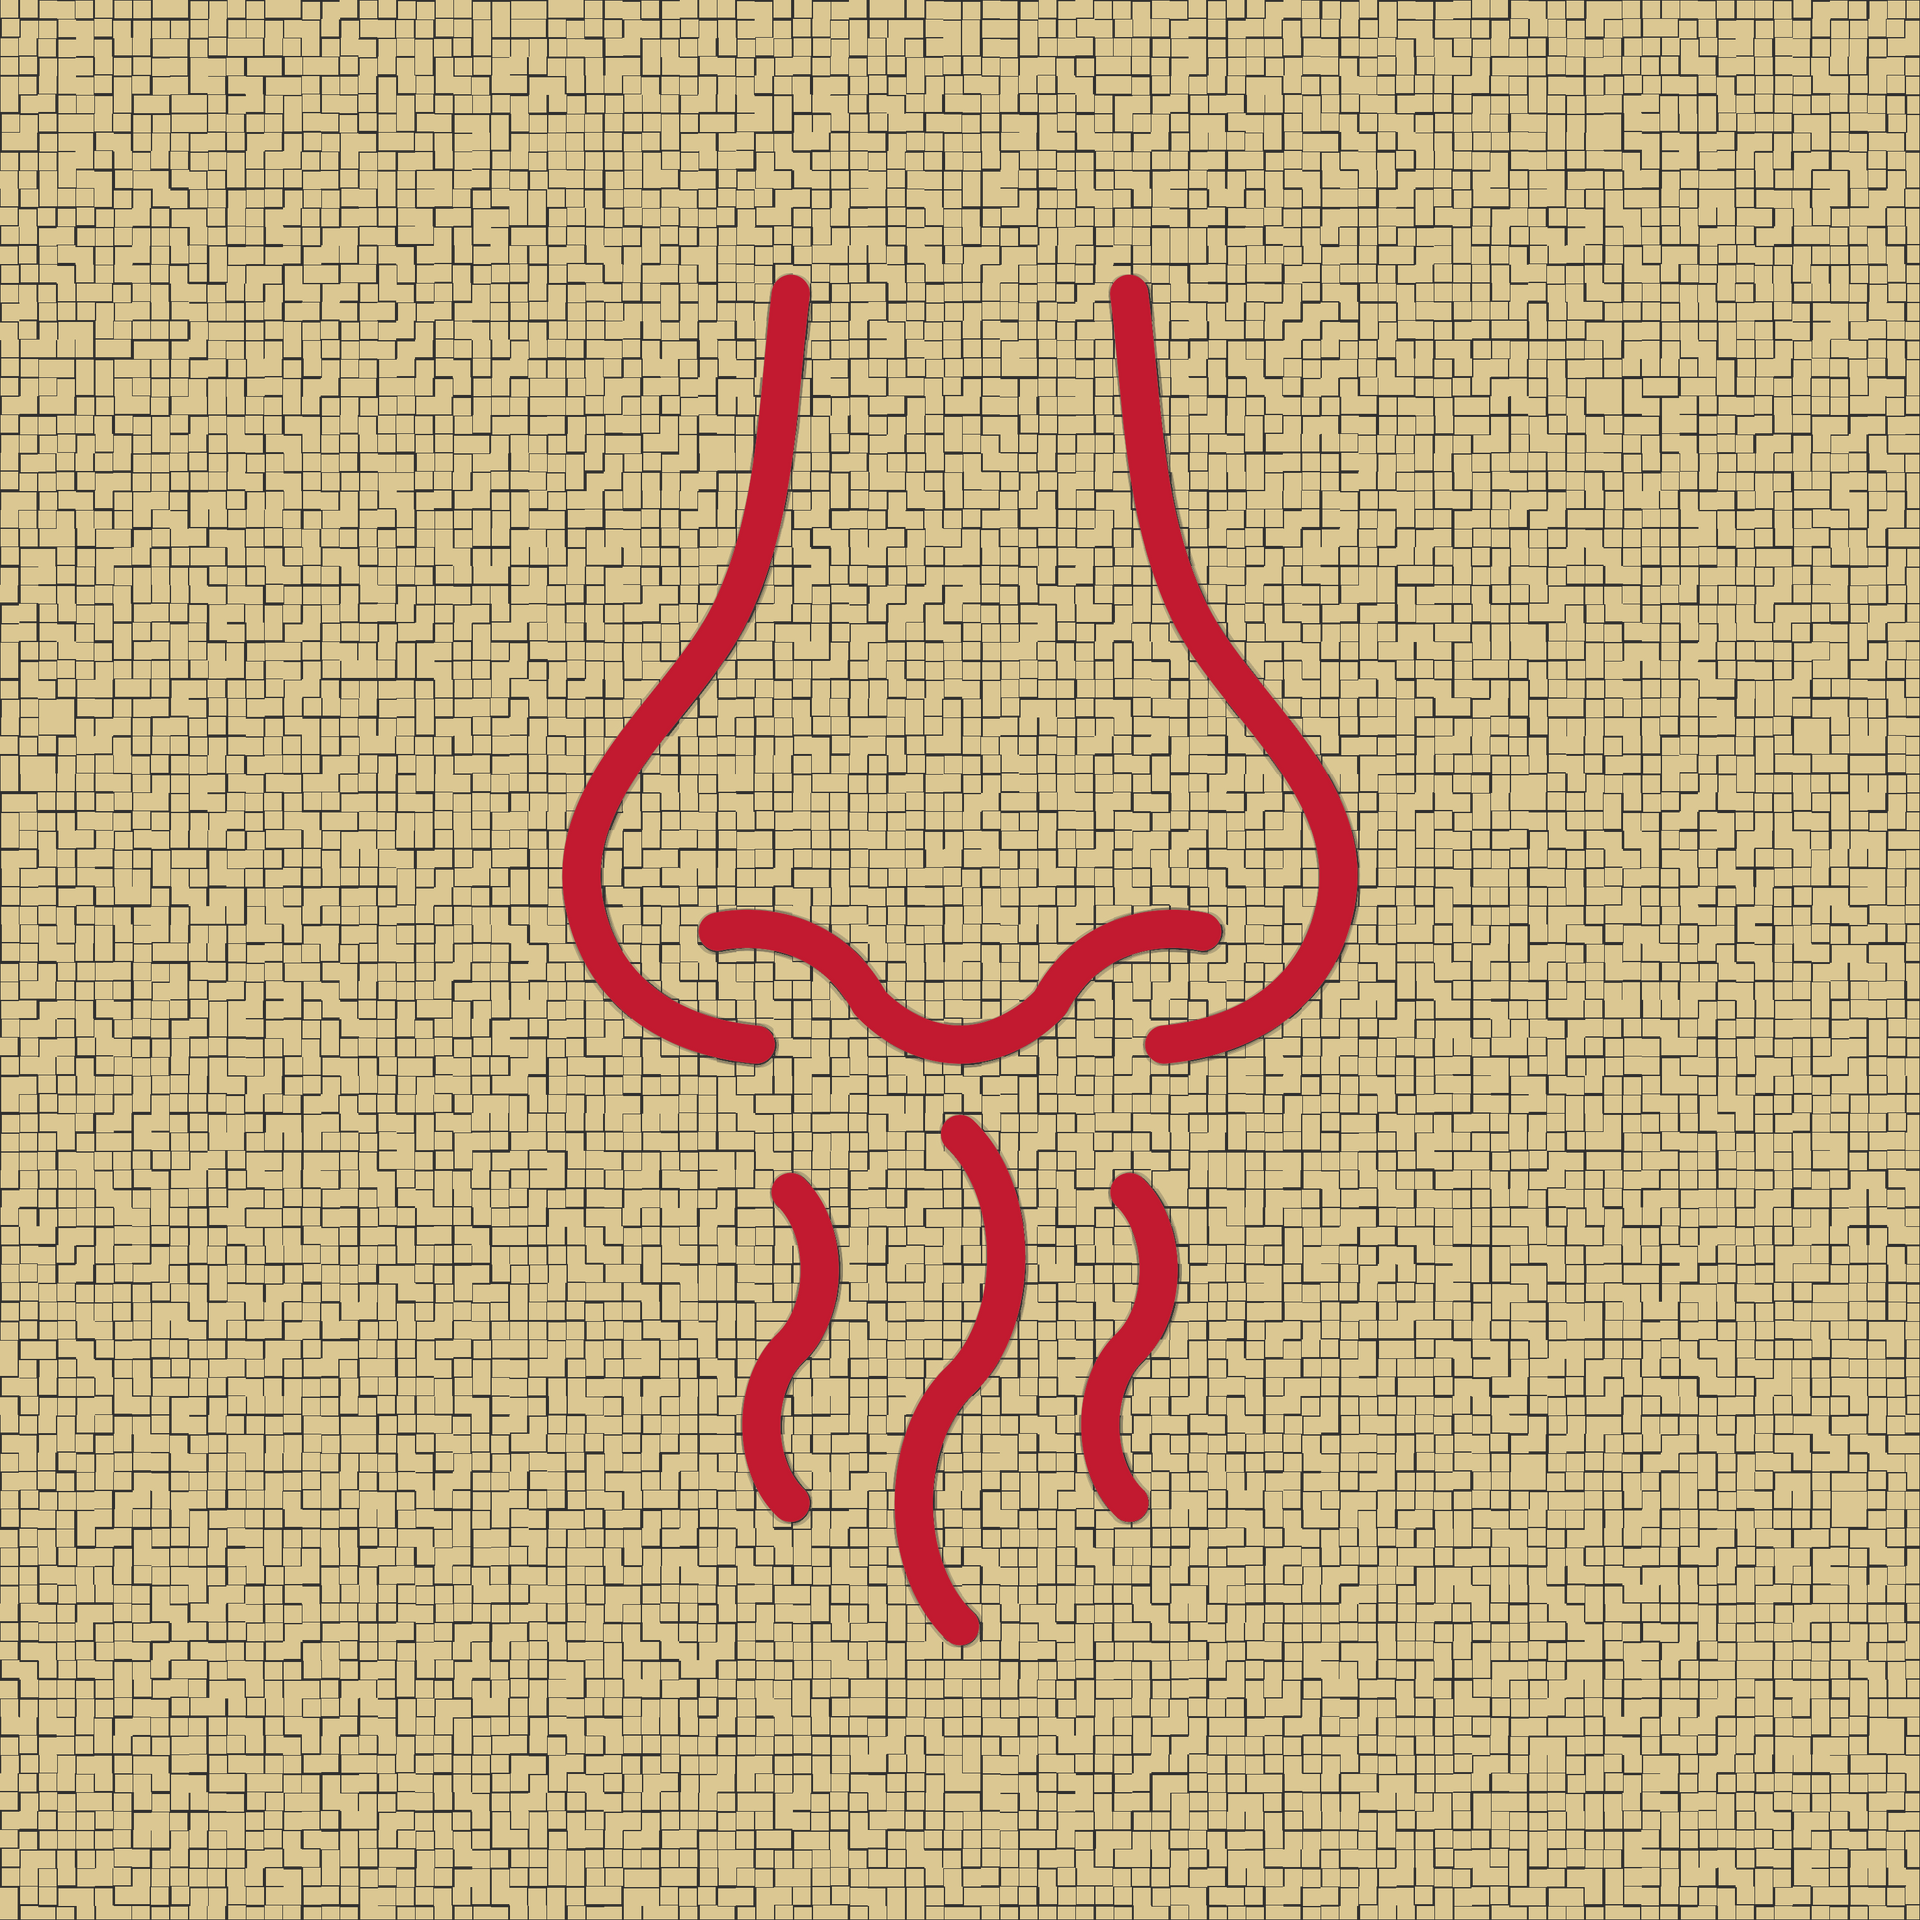 A scent icon with a nose and squiggles to represent the smell